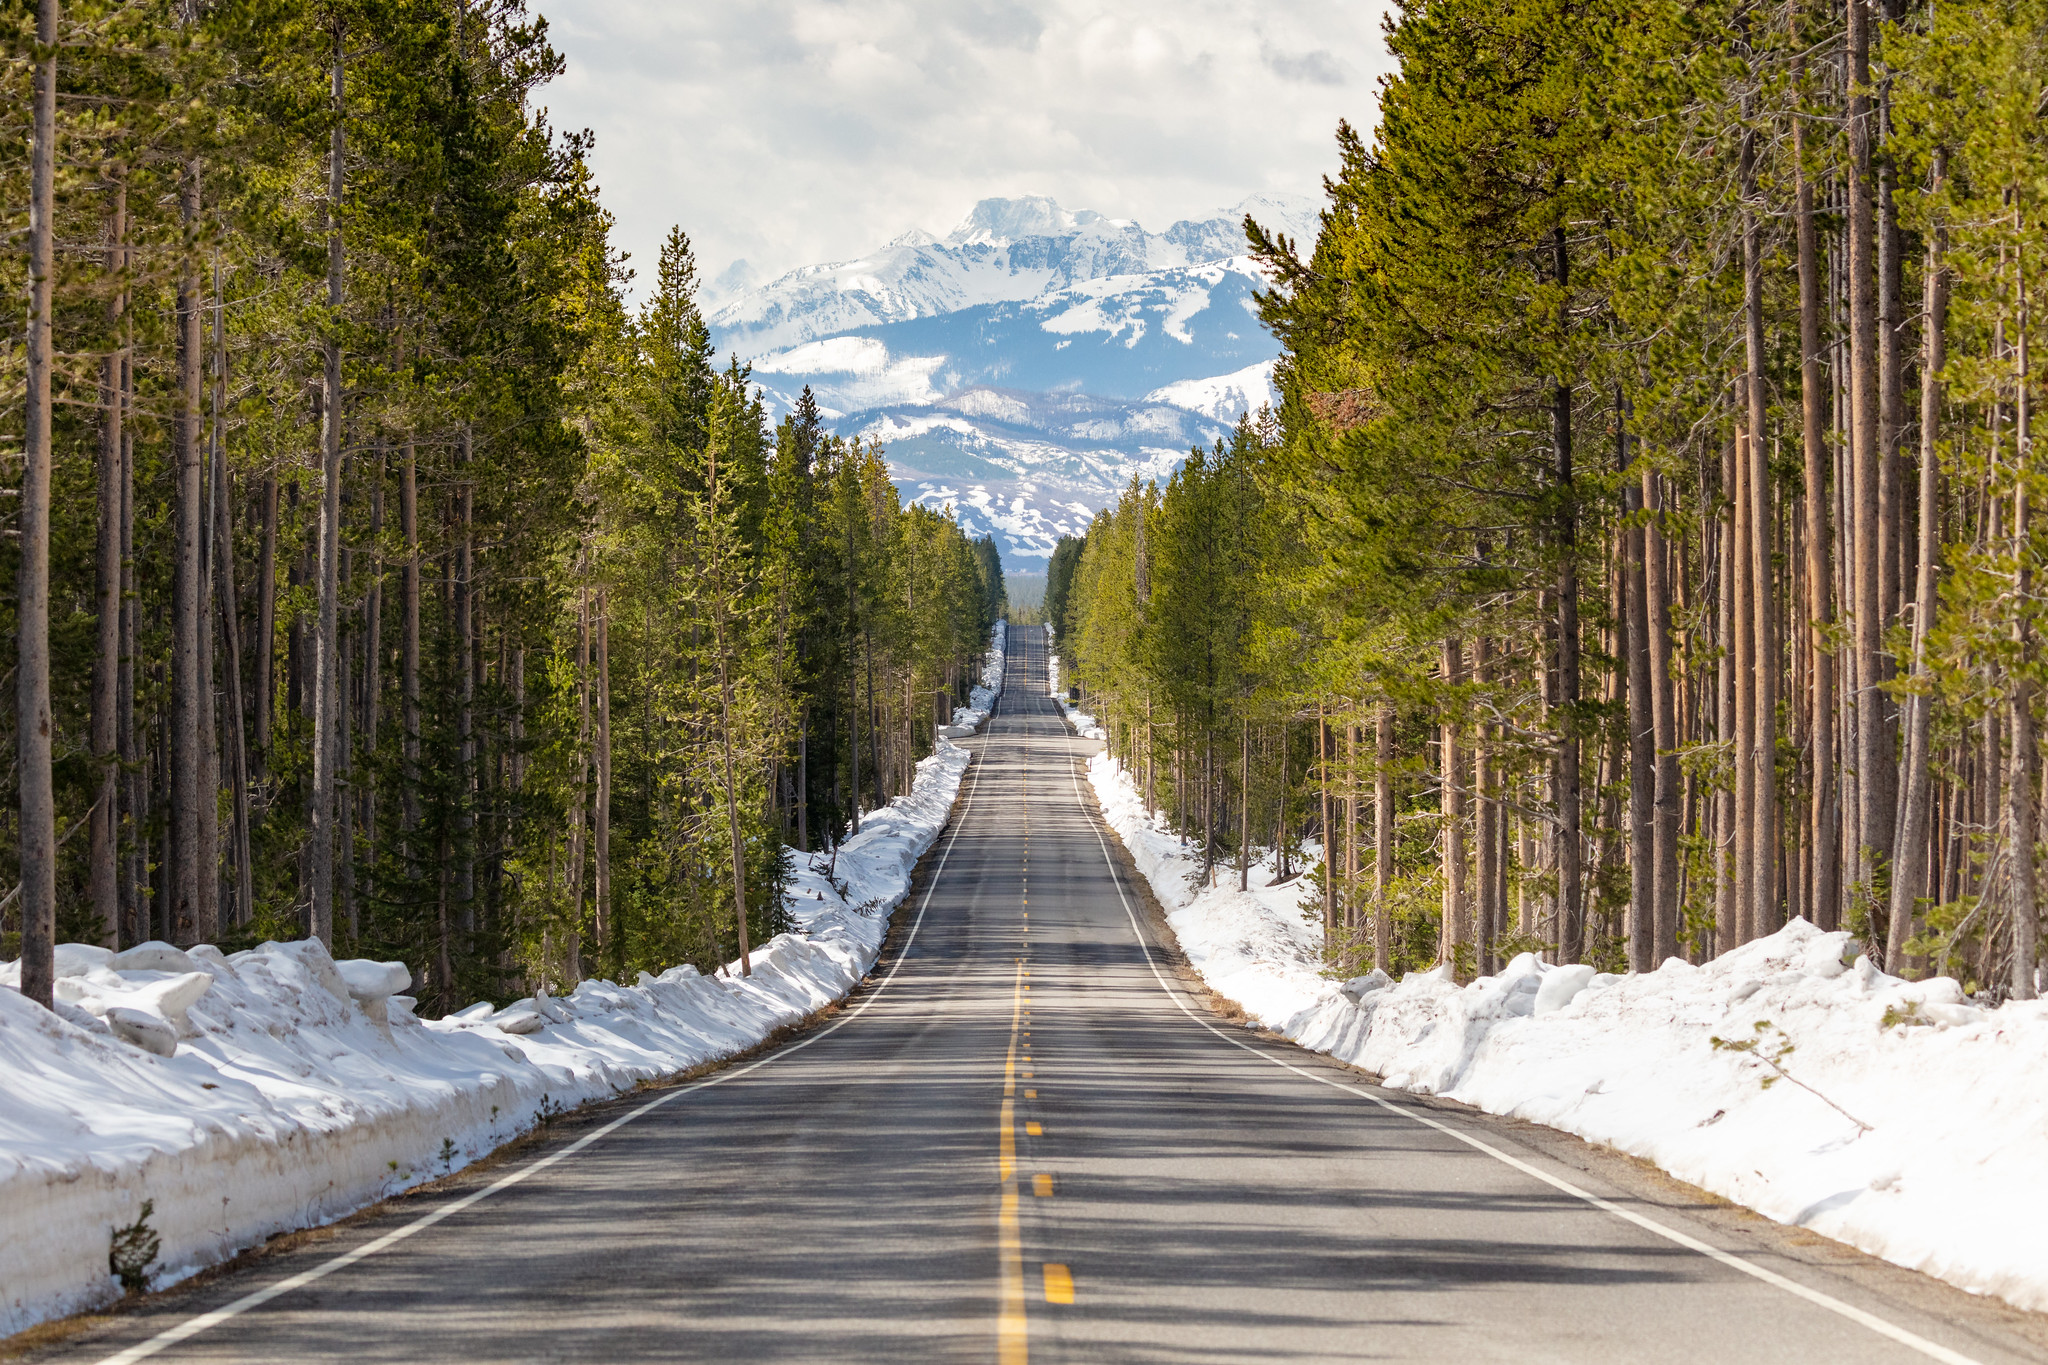 a straight, paved, two-lane road through trees, surrounded by snowbanks and a view of snowy mountains